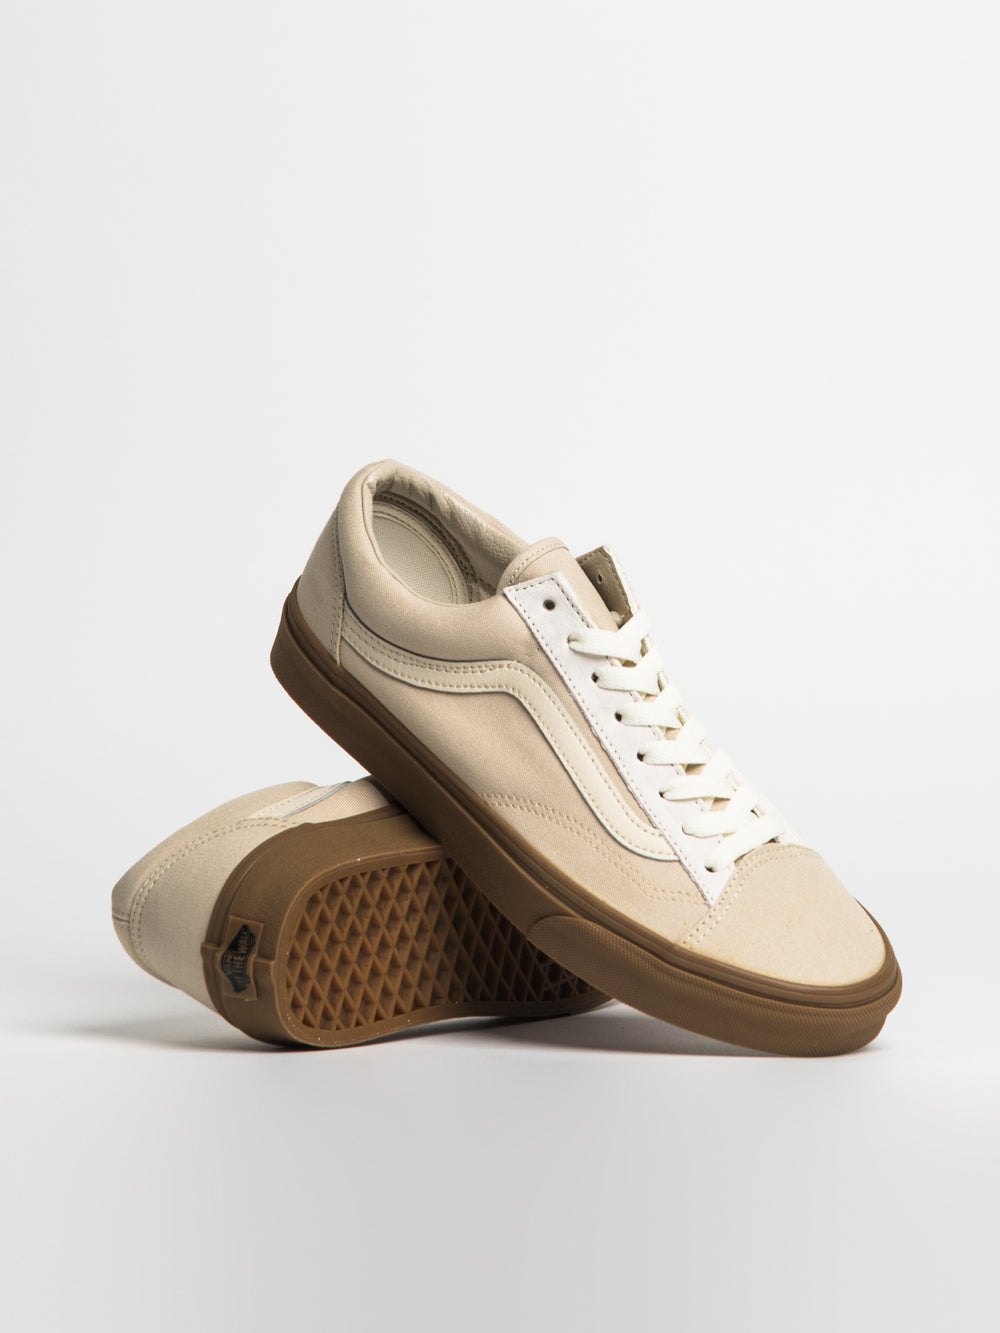 MENS VANS STYLE 36 | Boathouse Footwear Collective